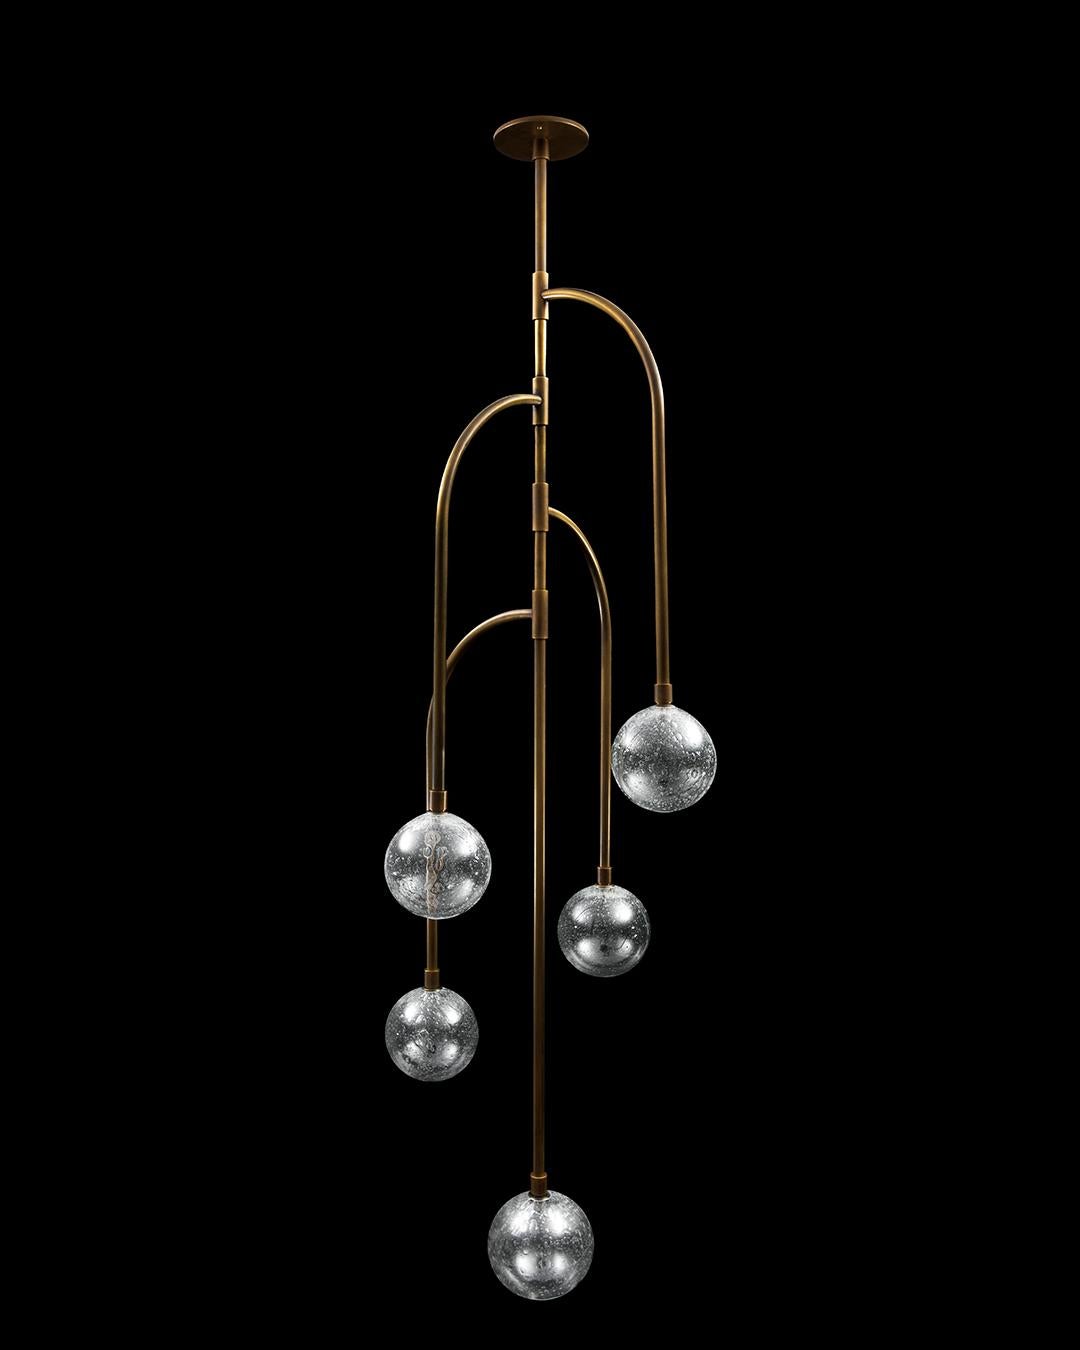 JAVIER ROBLES 1ST EDITION

Inspired by the Latin American legend of the weeping mother, the Llorona lighting collection recalls the form of the weeping willow tree.

Elegantly suspended from the ceiling, the simple curves of the pendant maintain a